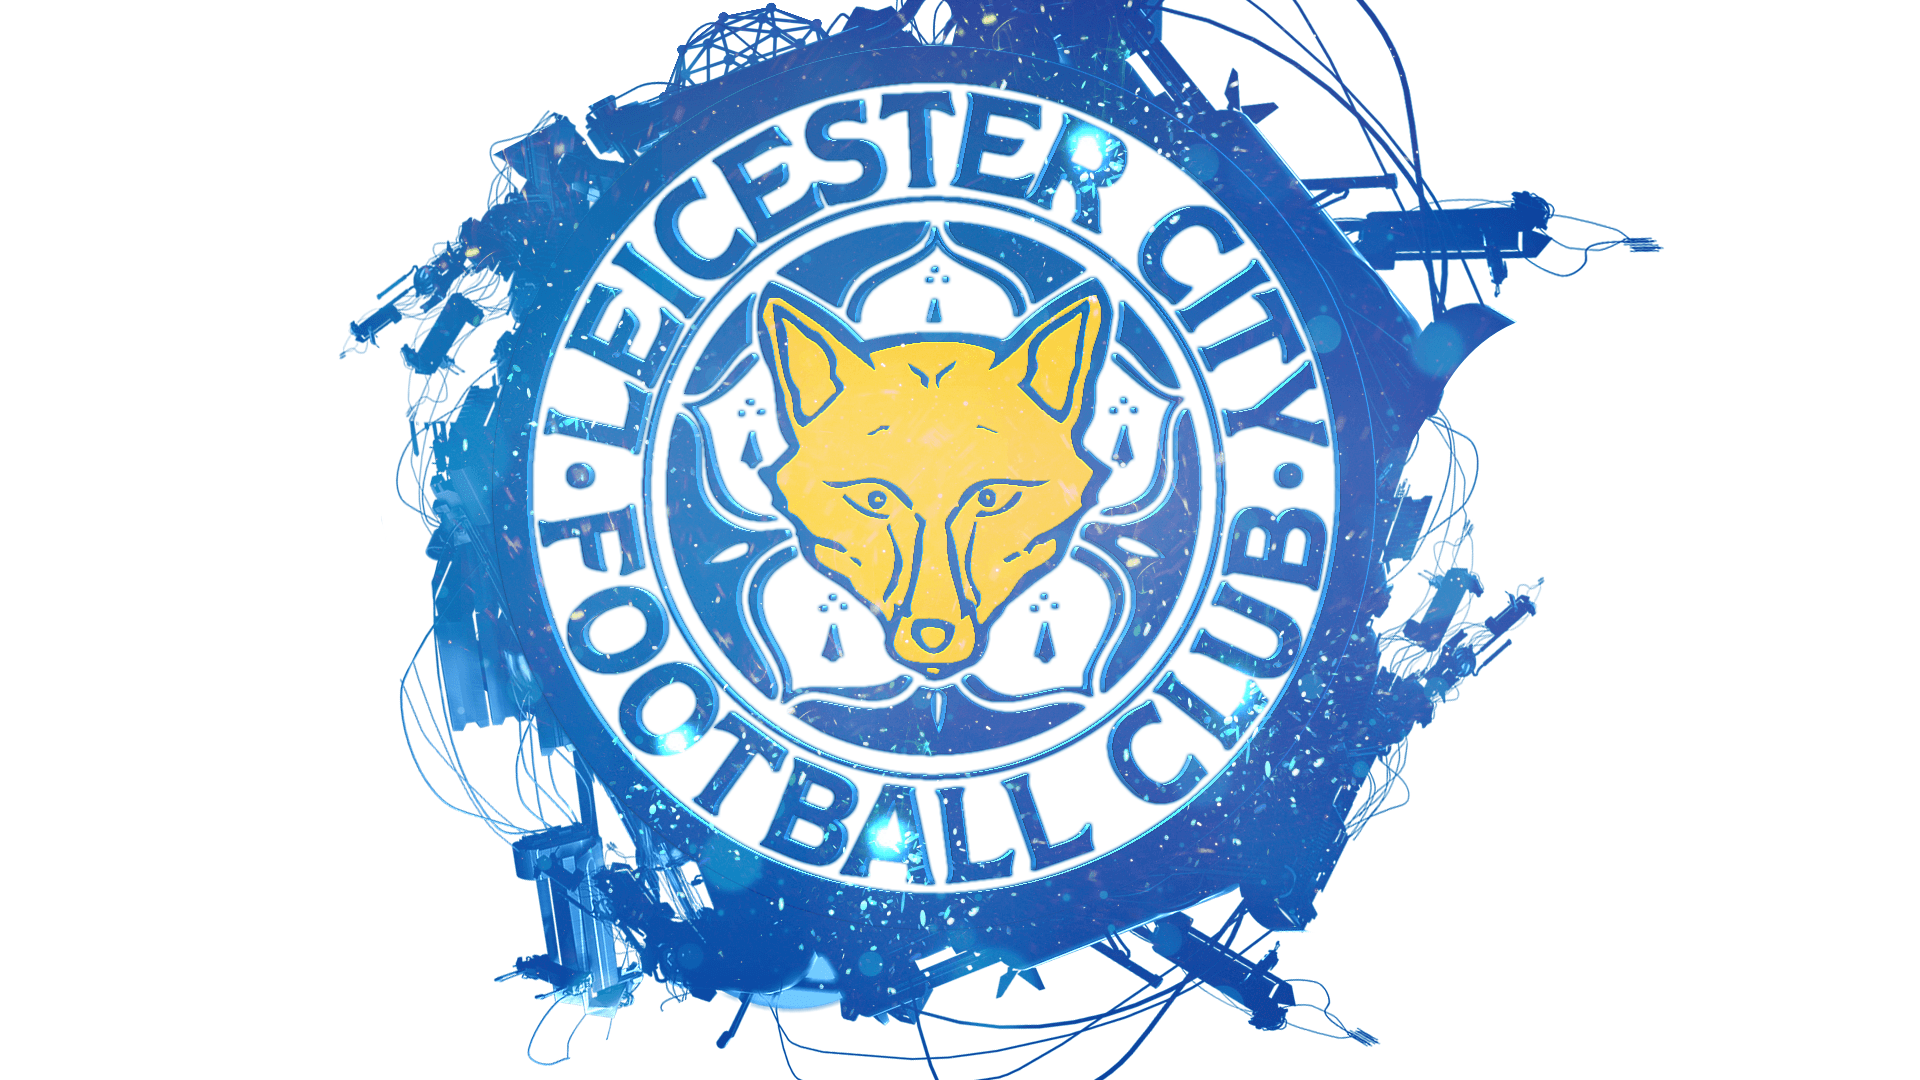 Leicester City F.c. Wallpapers - Wallpaper Cave